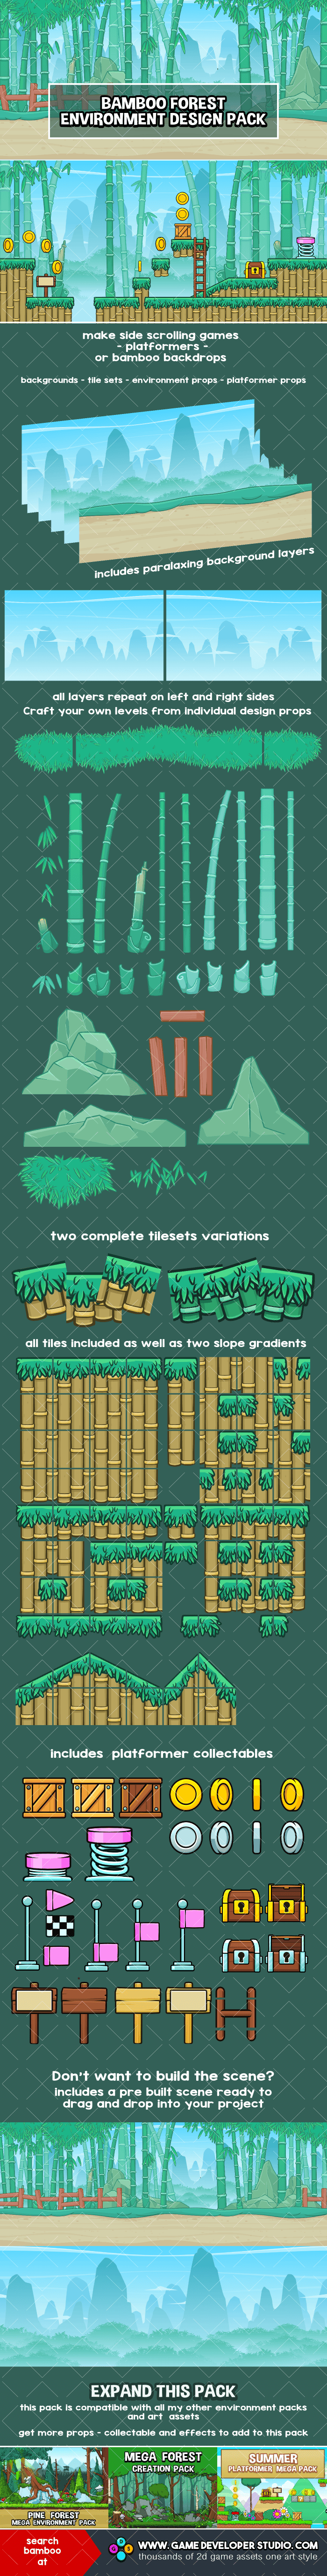 Bamboo forest scene creation game asset pack